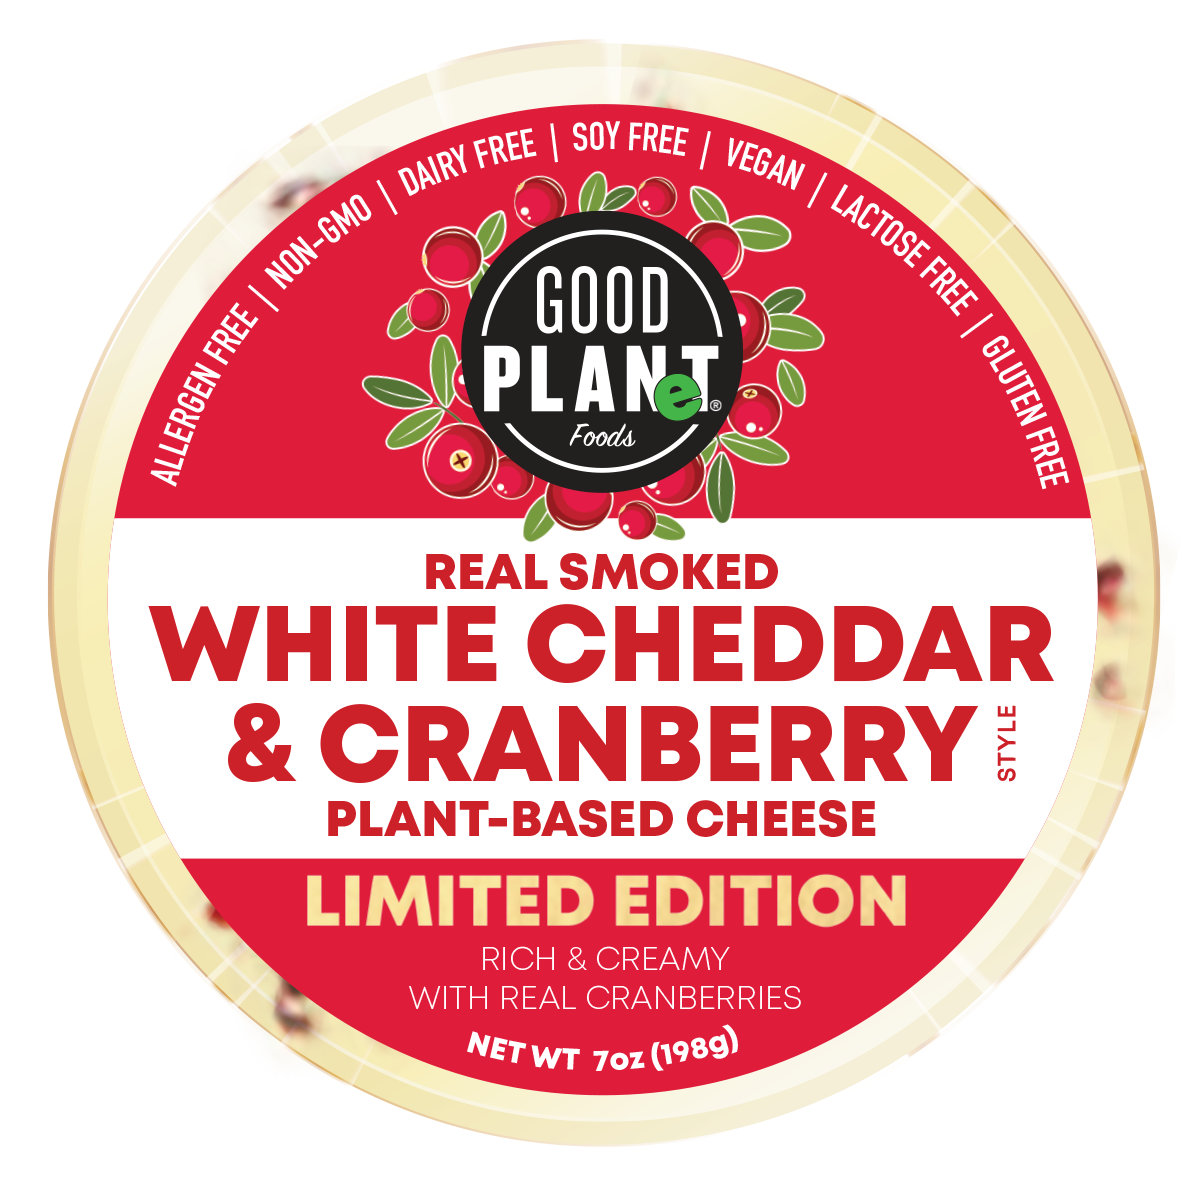 LIMITED EDITION Smoked White Cheddar & Cranberry Wheel